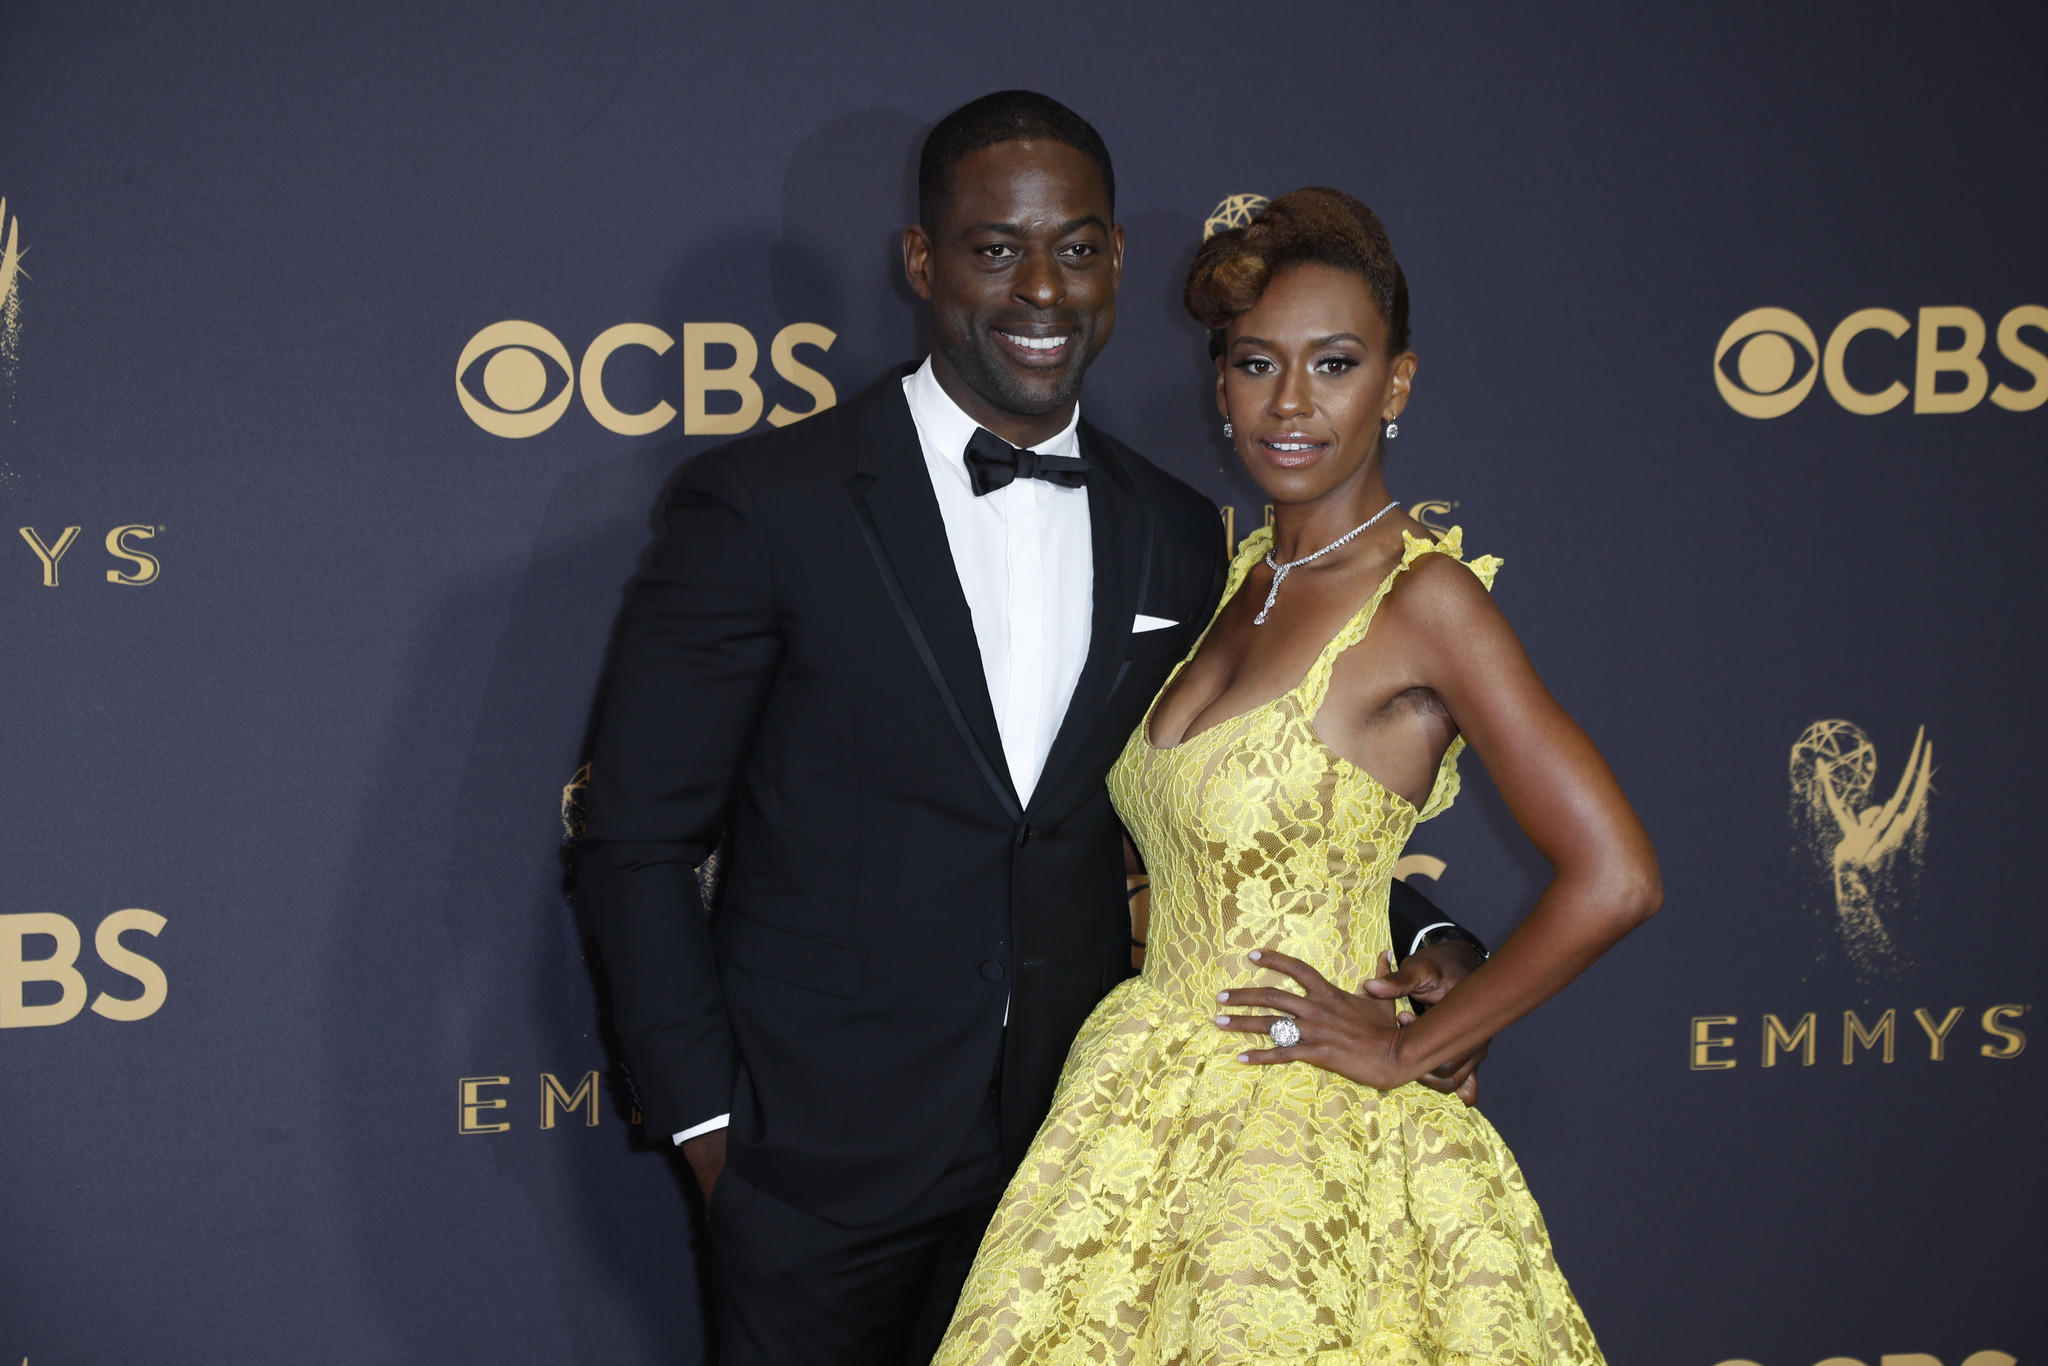 "This Is Us" actor Sterling K. Brown and Ryan Michelle Bathe arrive at the 69th Emmy Awards at the Microsoft Theater in Los Angeles. (Kirk McKoy / Los Angeles Times)